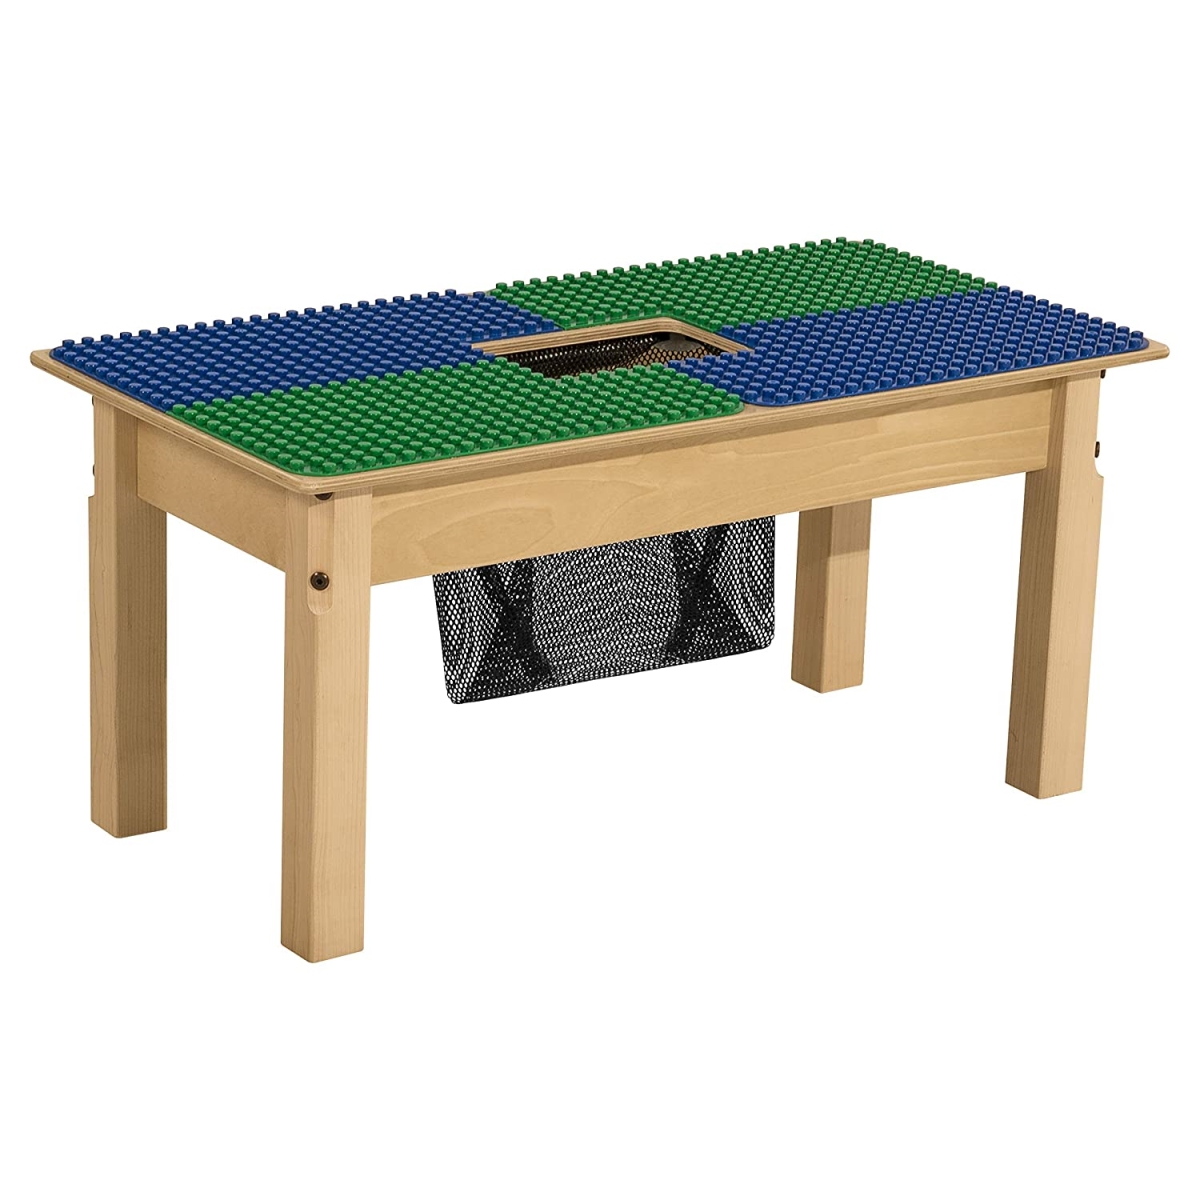 Tp1631pgn18-bg 18 In. Duplo Compatible Table With Legs, Blue & Green - Rectangle